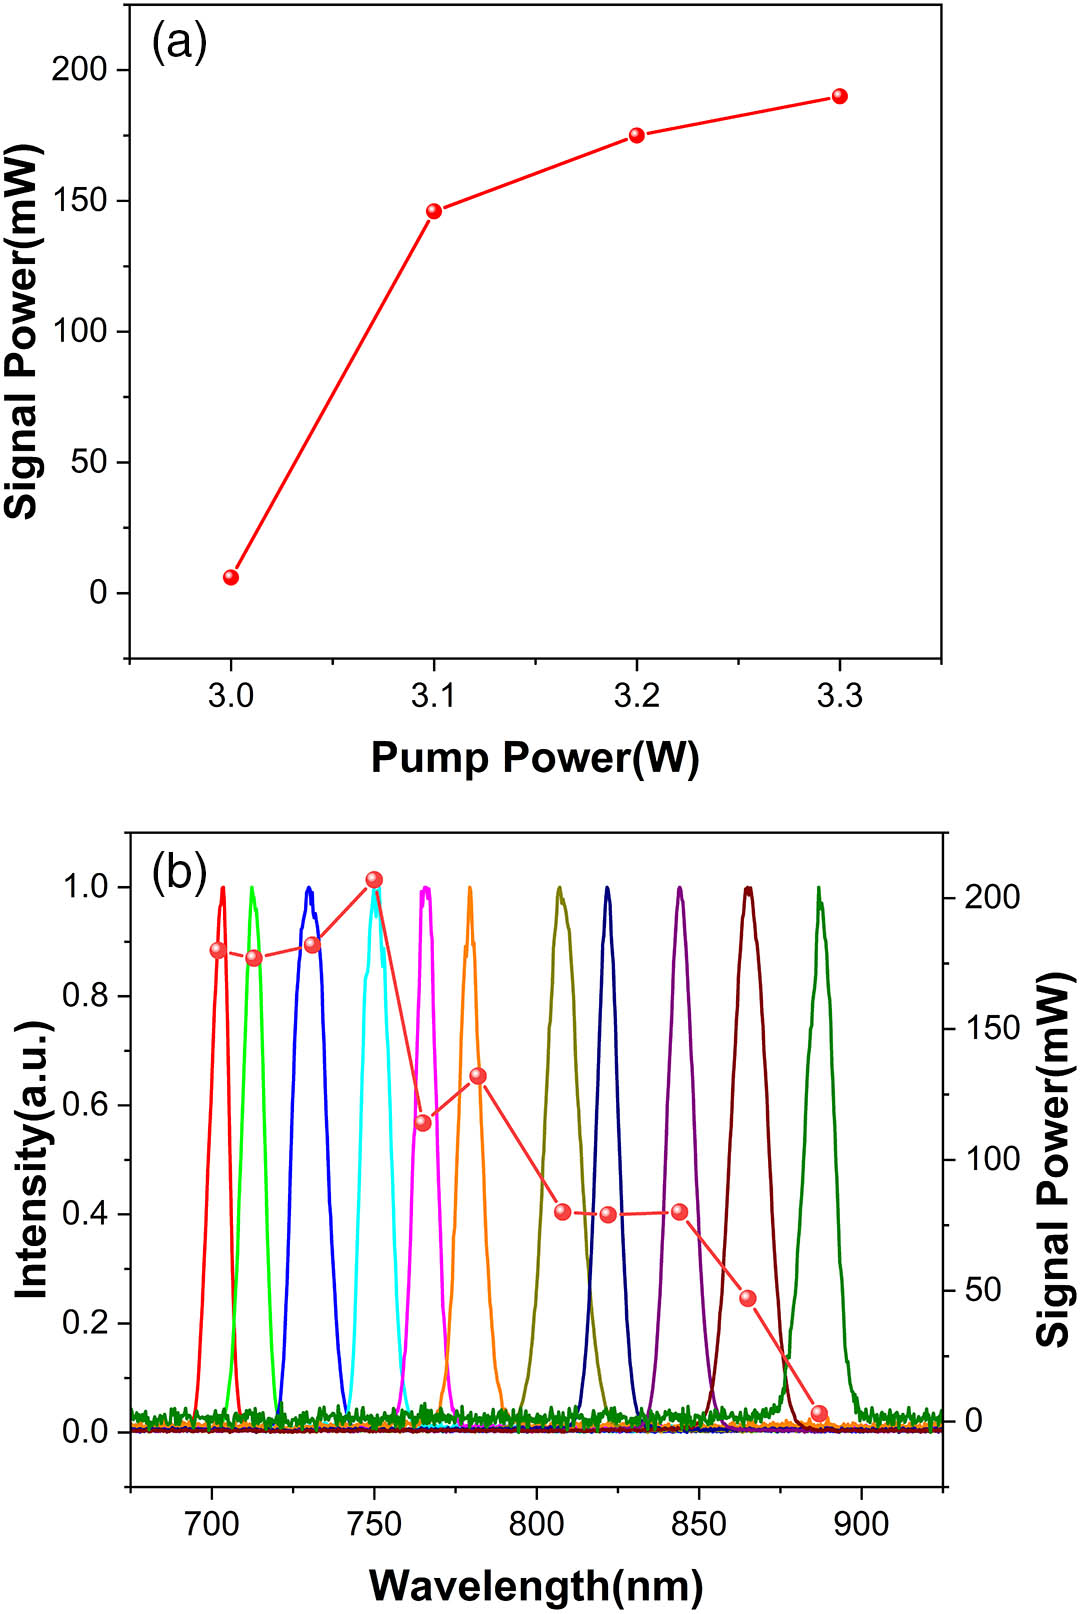 (a) Output power of the signal at 720 nm versus the pump power, and (b) the normalized signal tuning range and the corresponding average power.